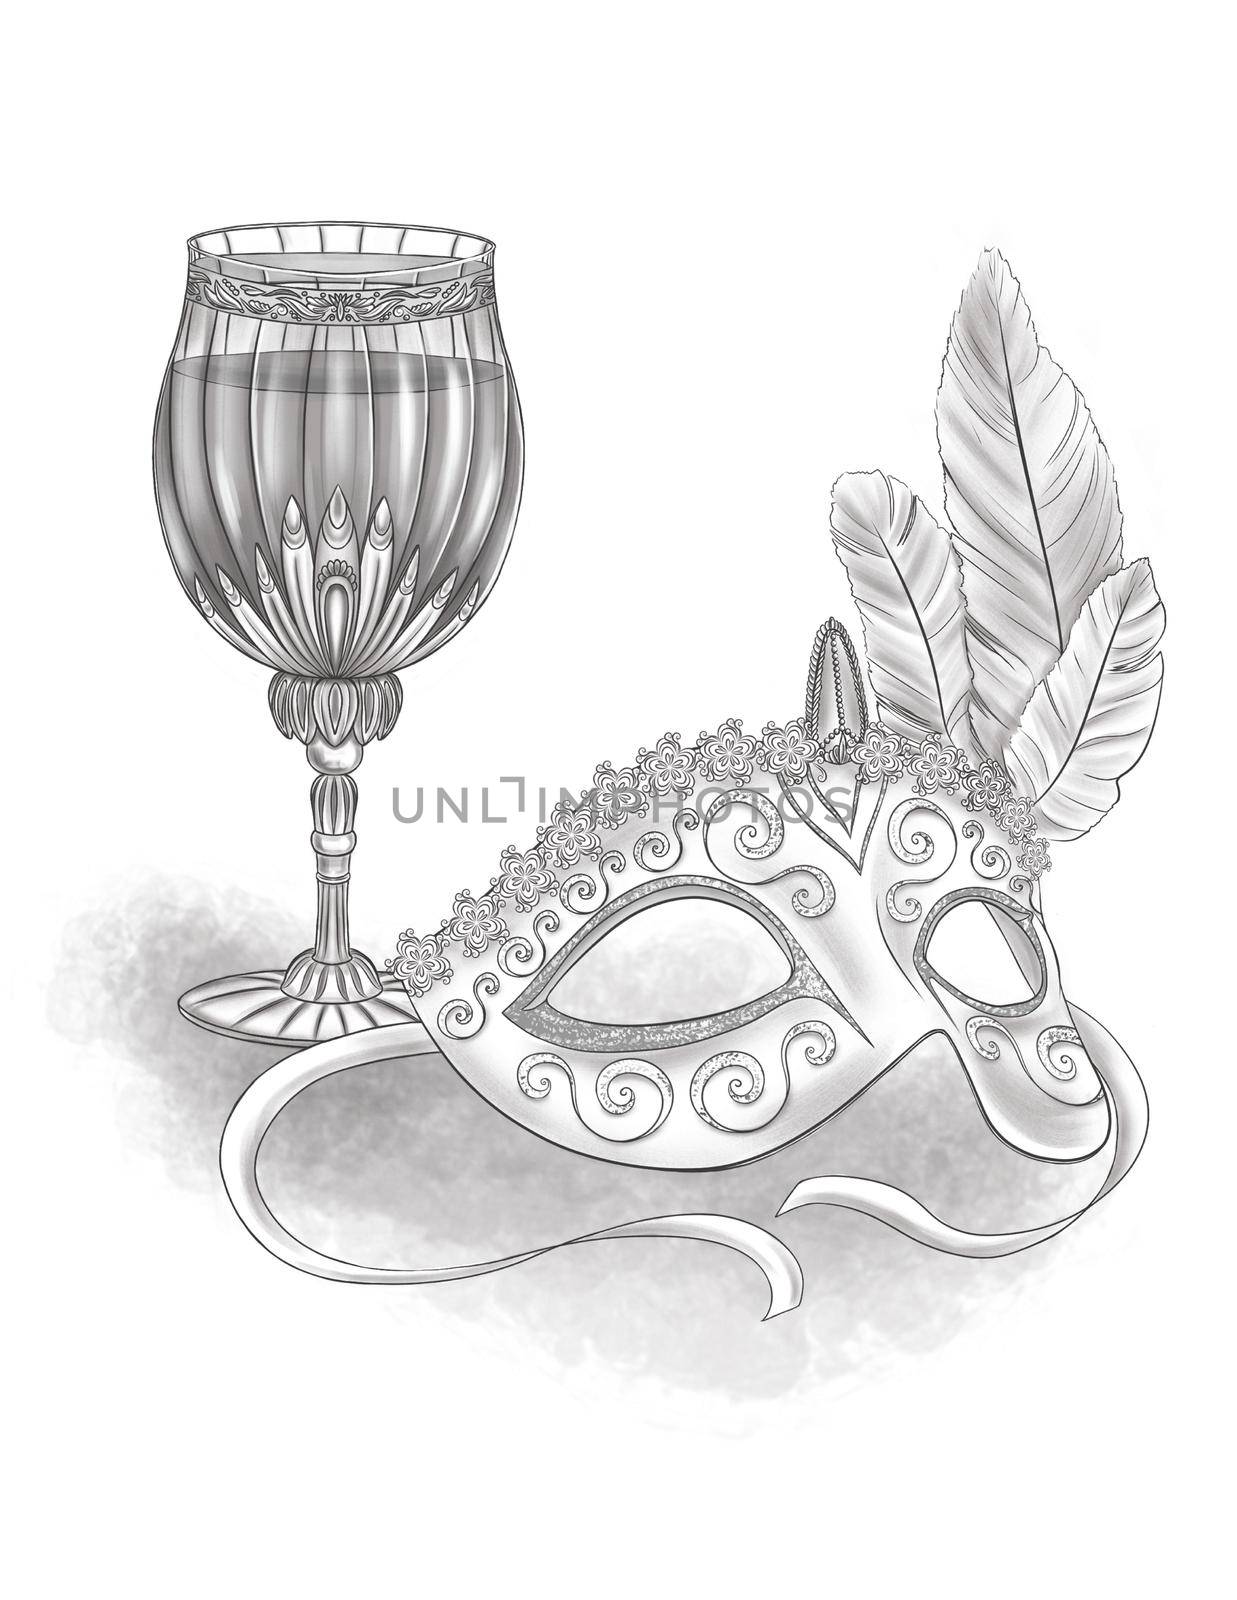 Masquerade Mask With Feathers Beside A Glass Full Of Wine Line Drawing.